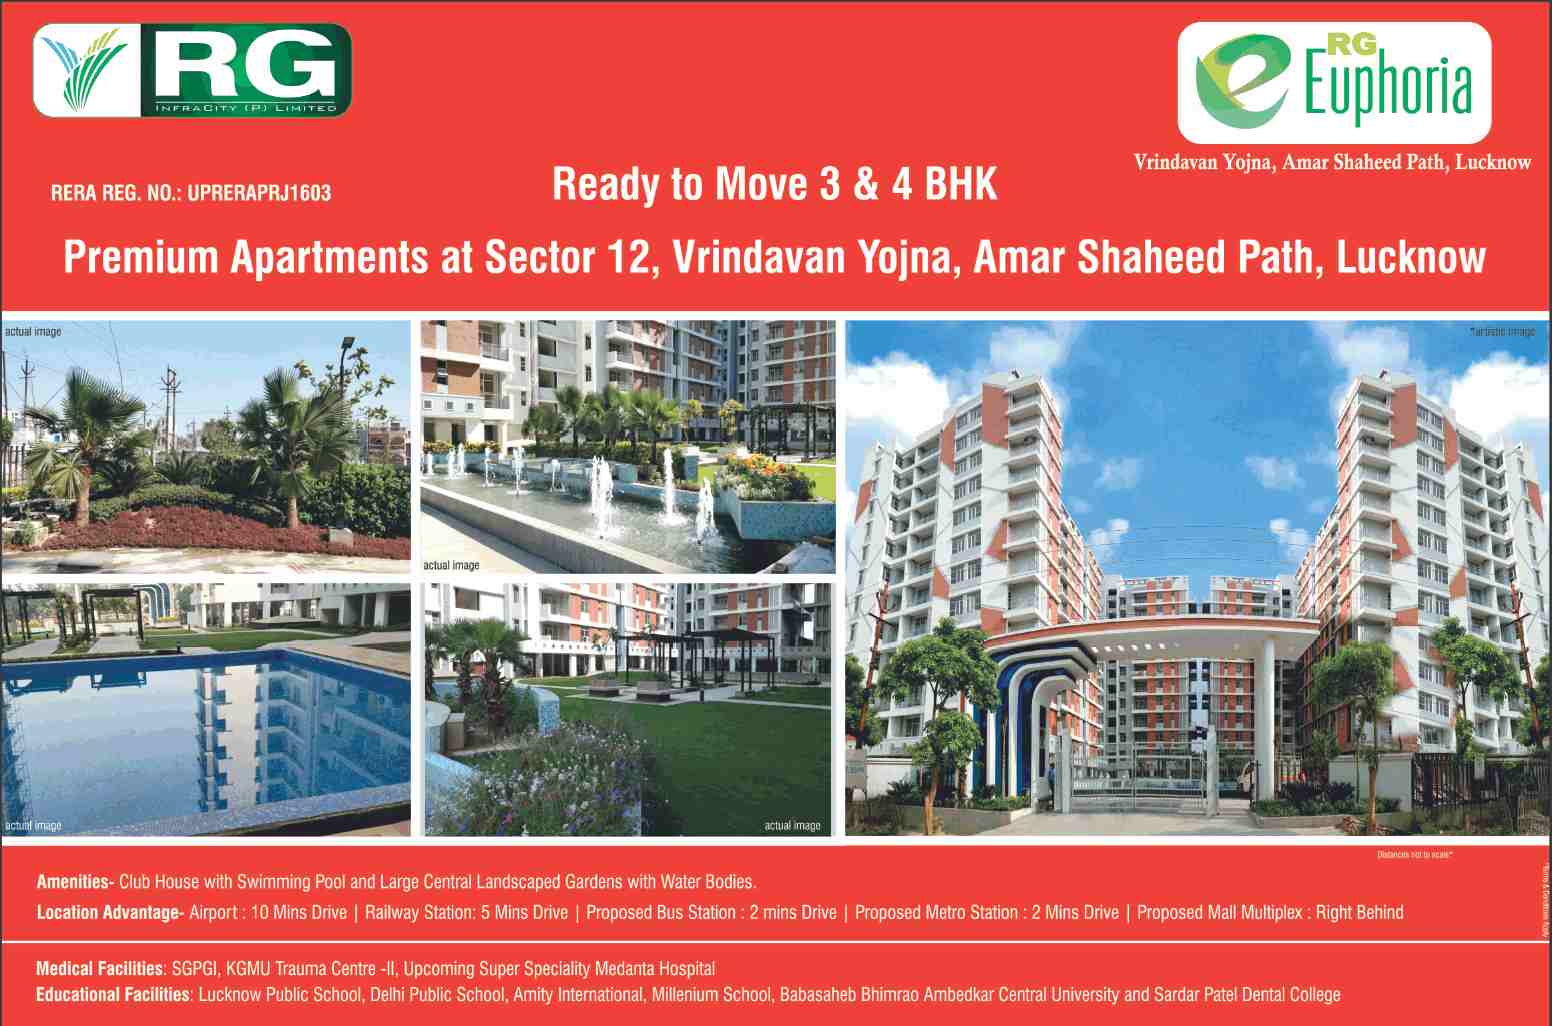 Book your ready to move premium homes at RG Euphoria in Lucknow